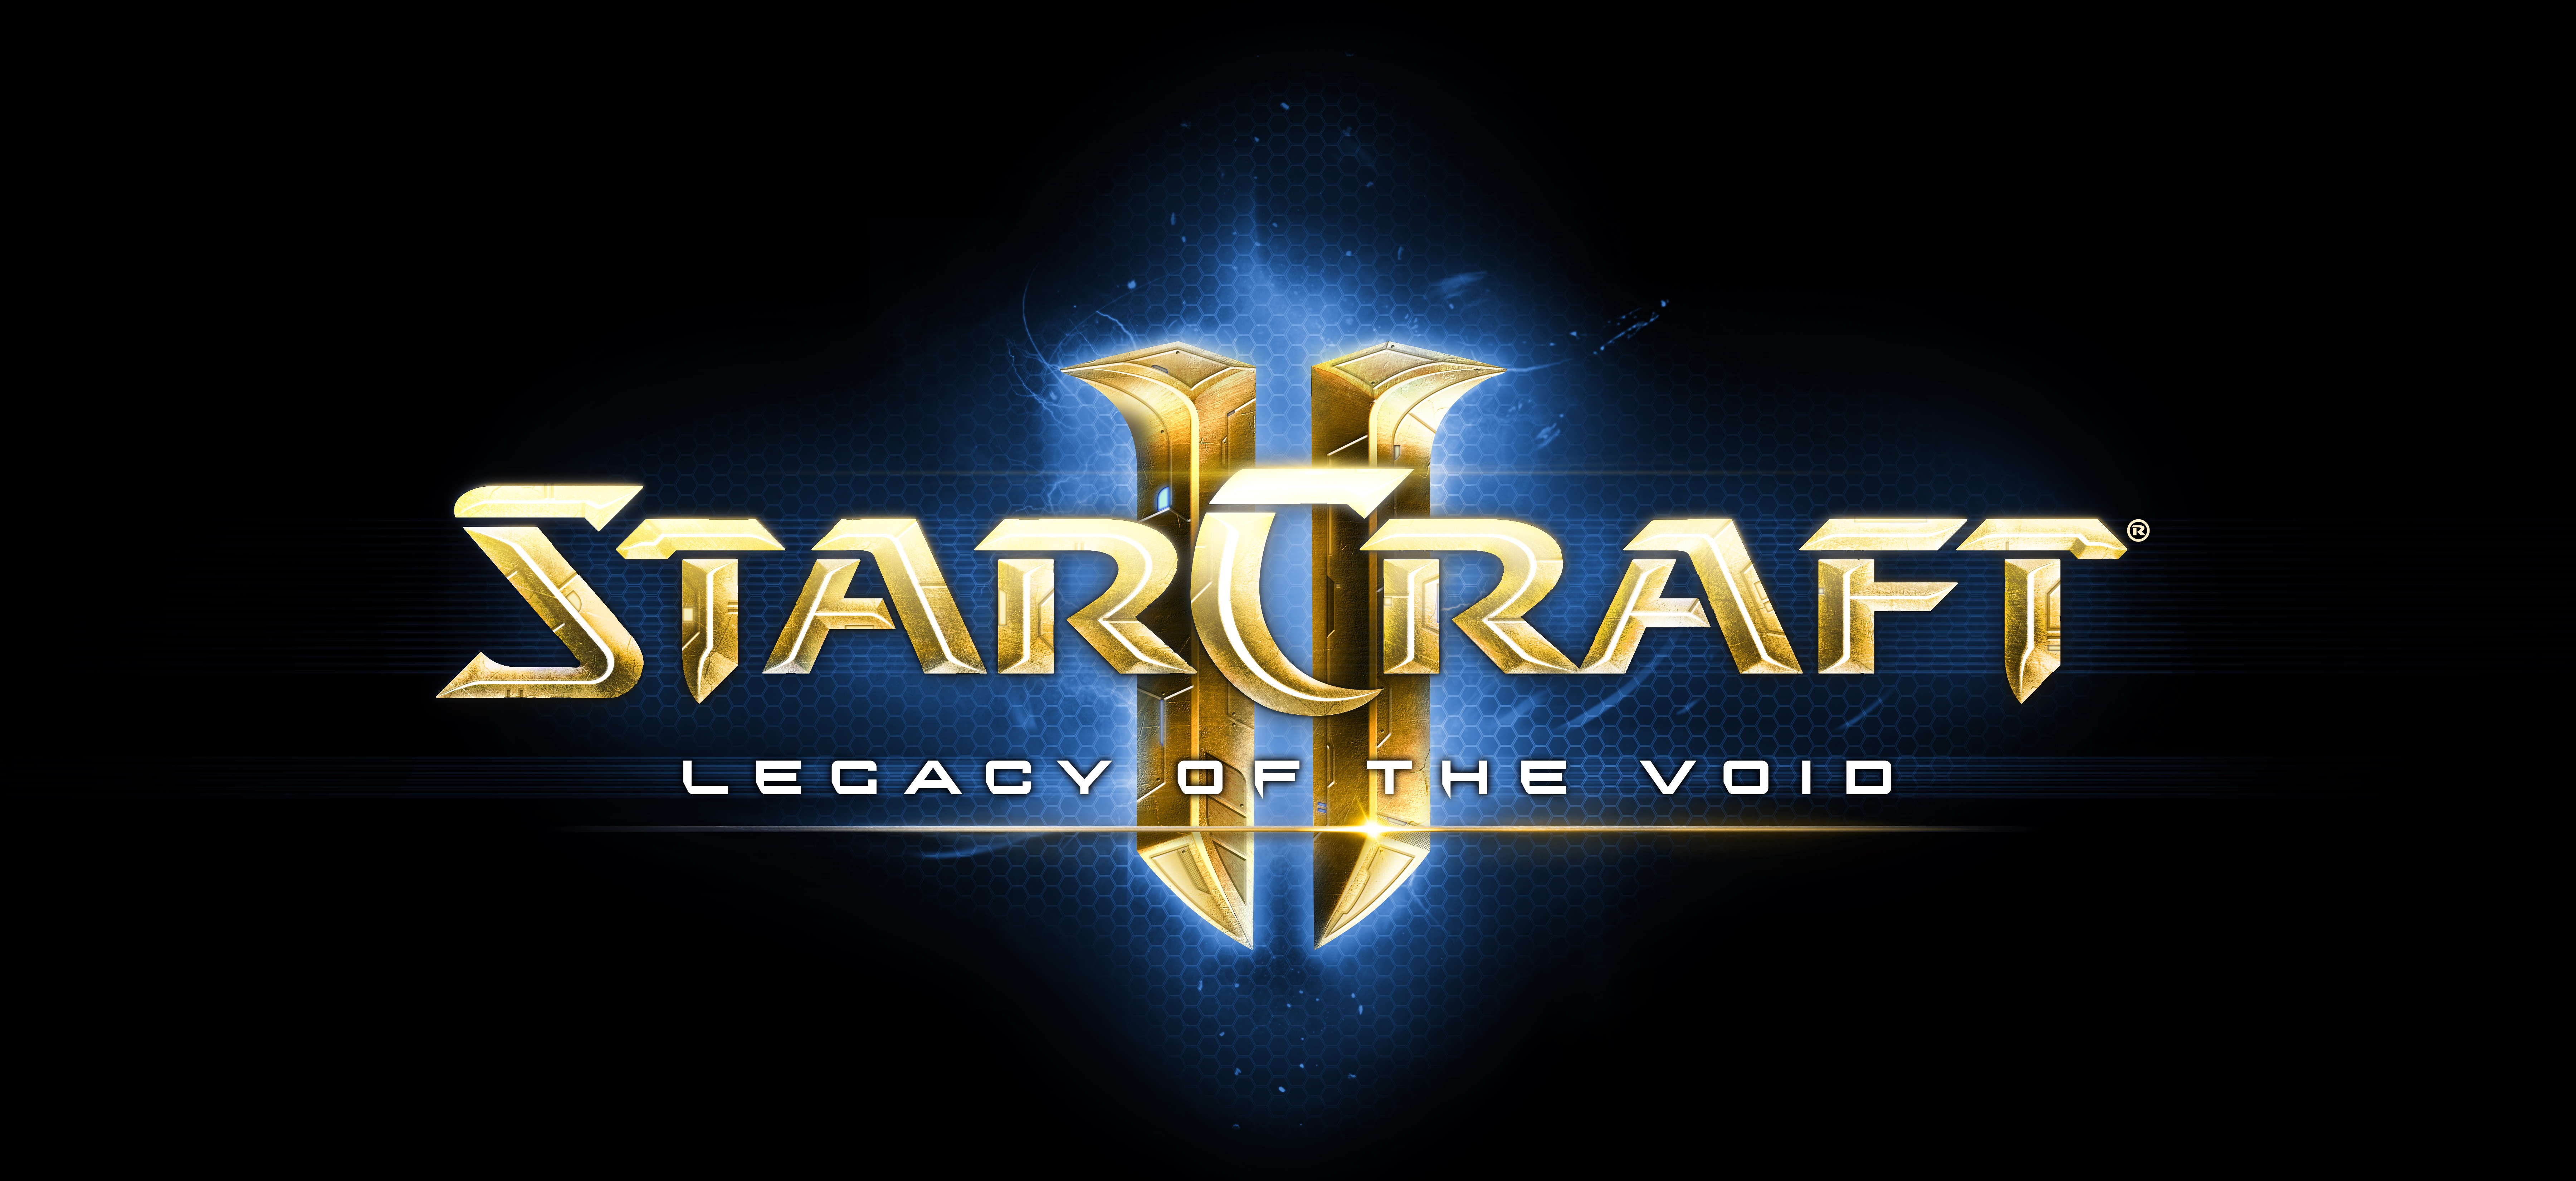 Legacy Of The Void - Graphic Design - HD Wallpaper 